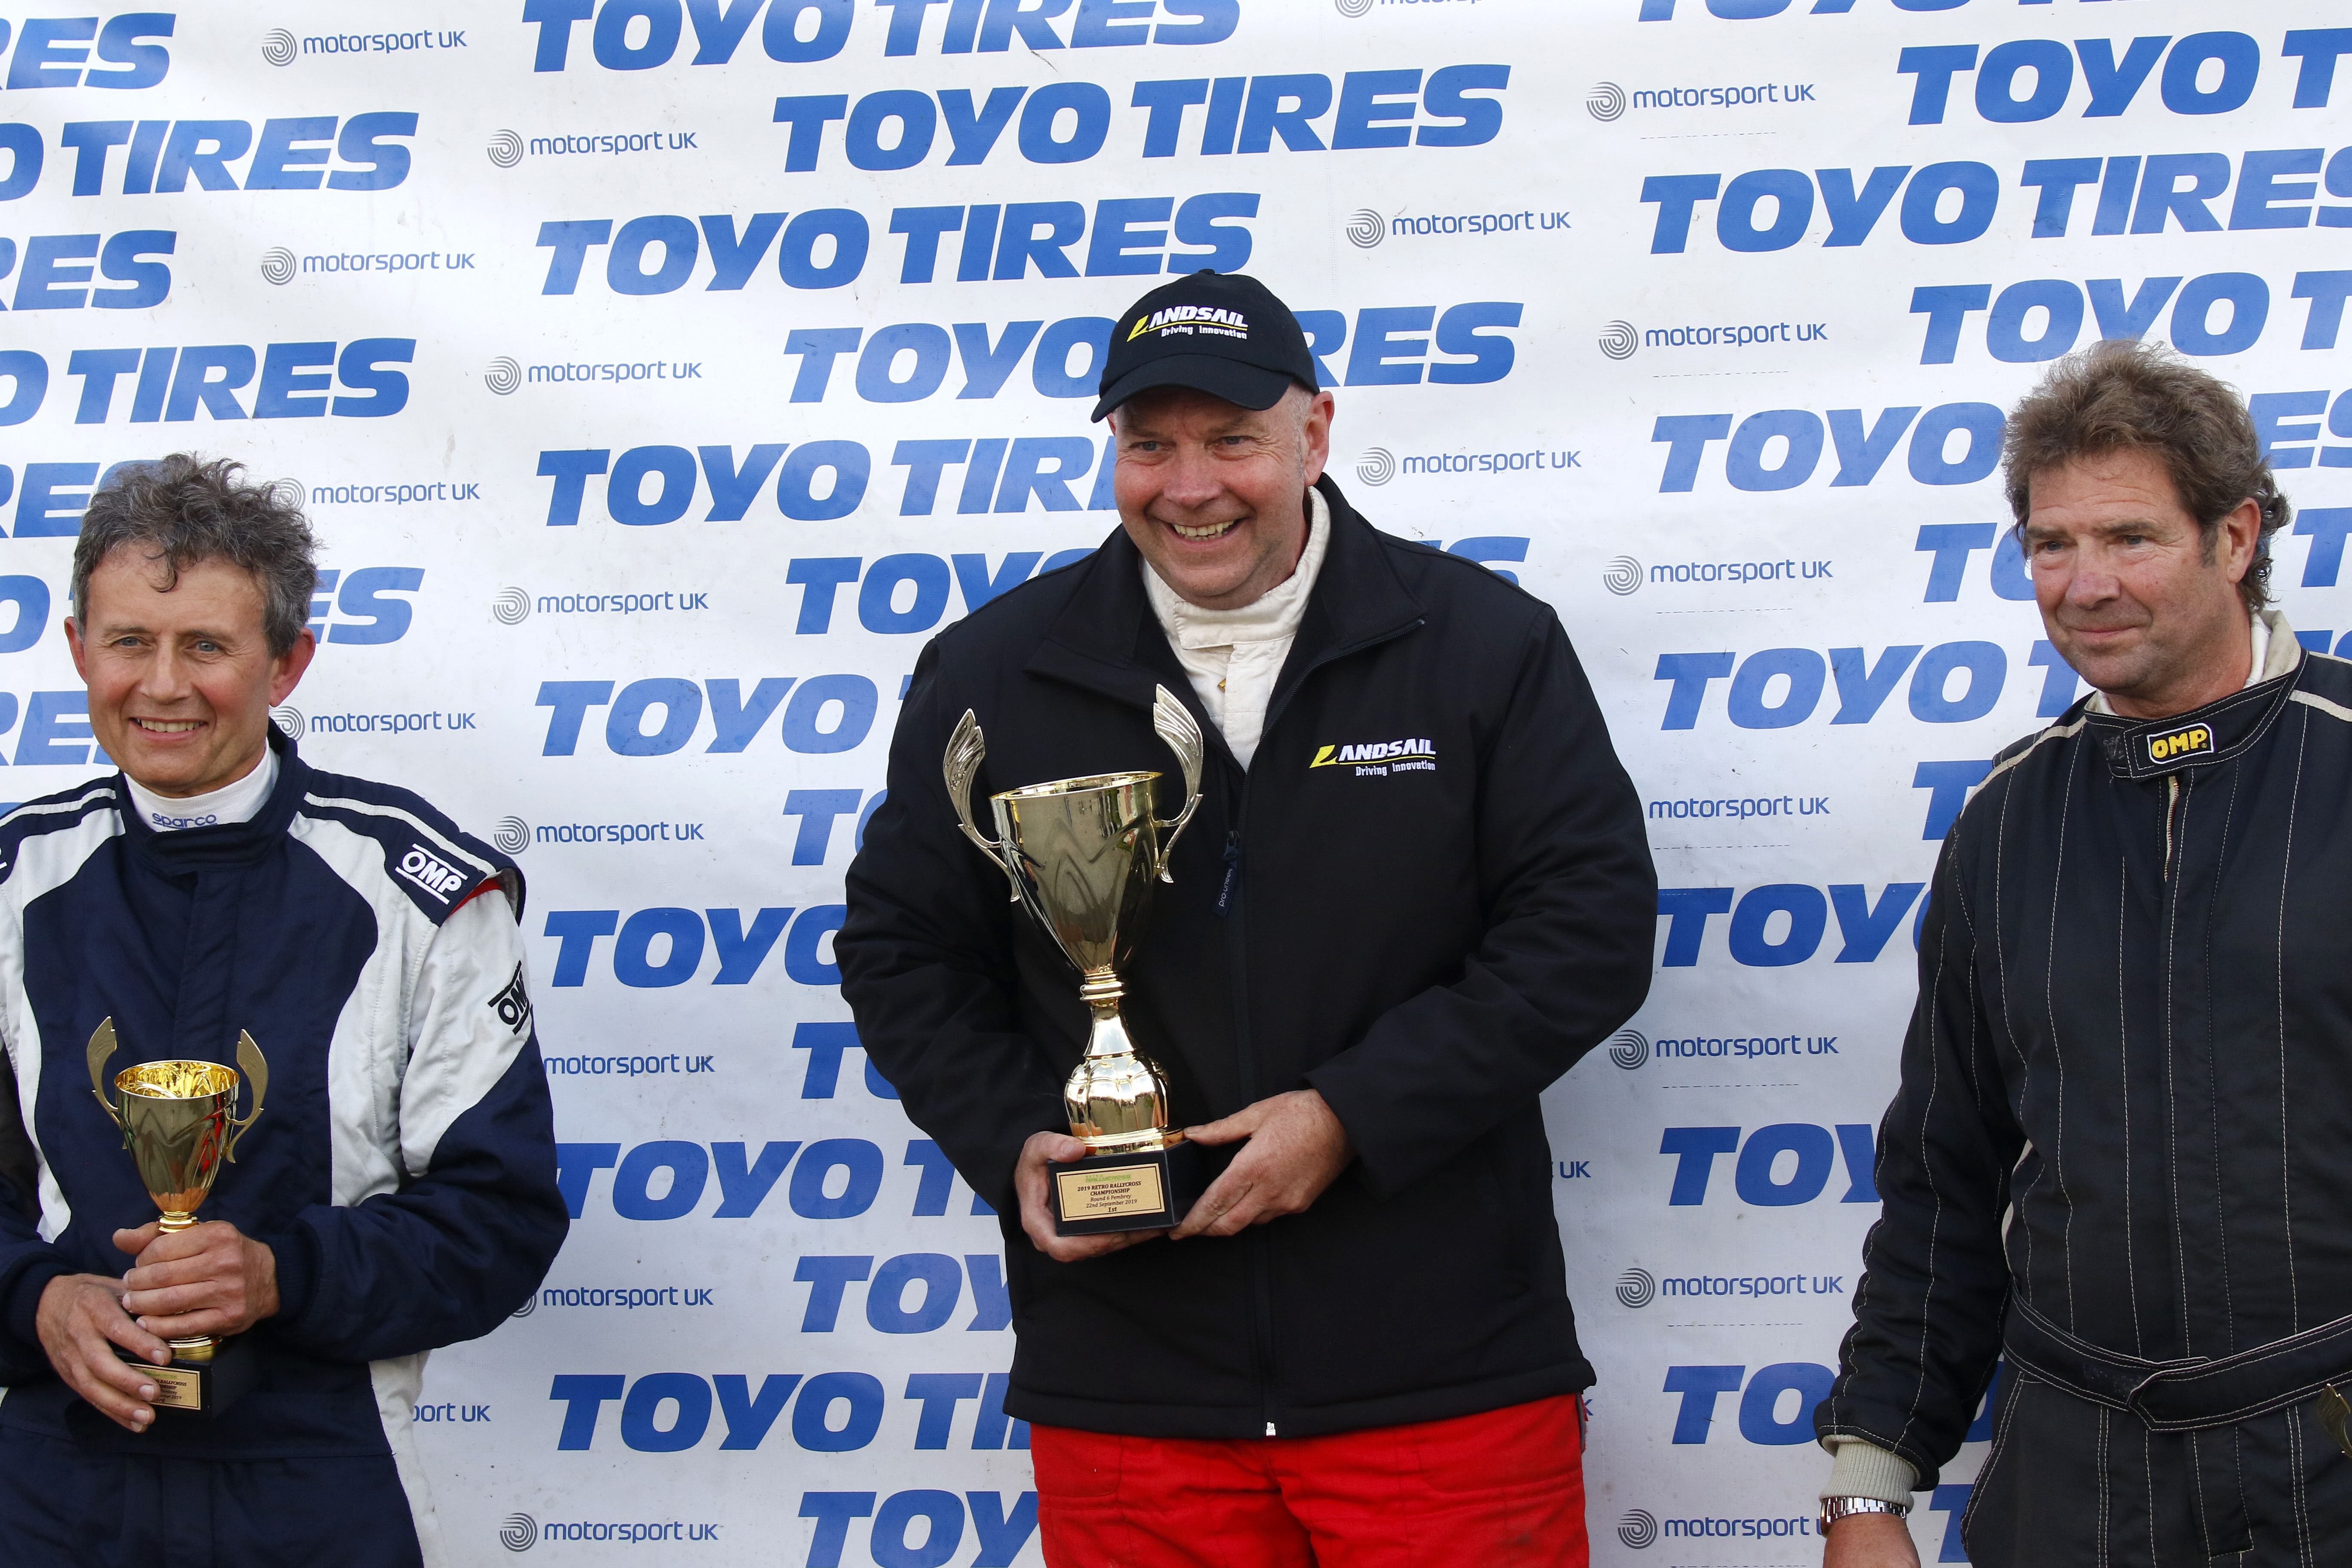 Lynch and Landsail Tyres Team Geriatric secure victory at Pembrey